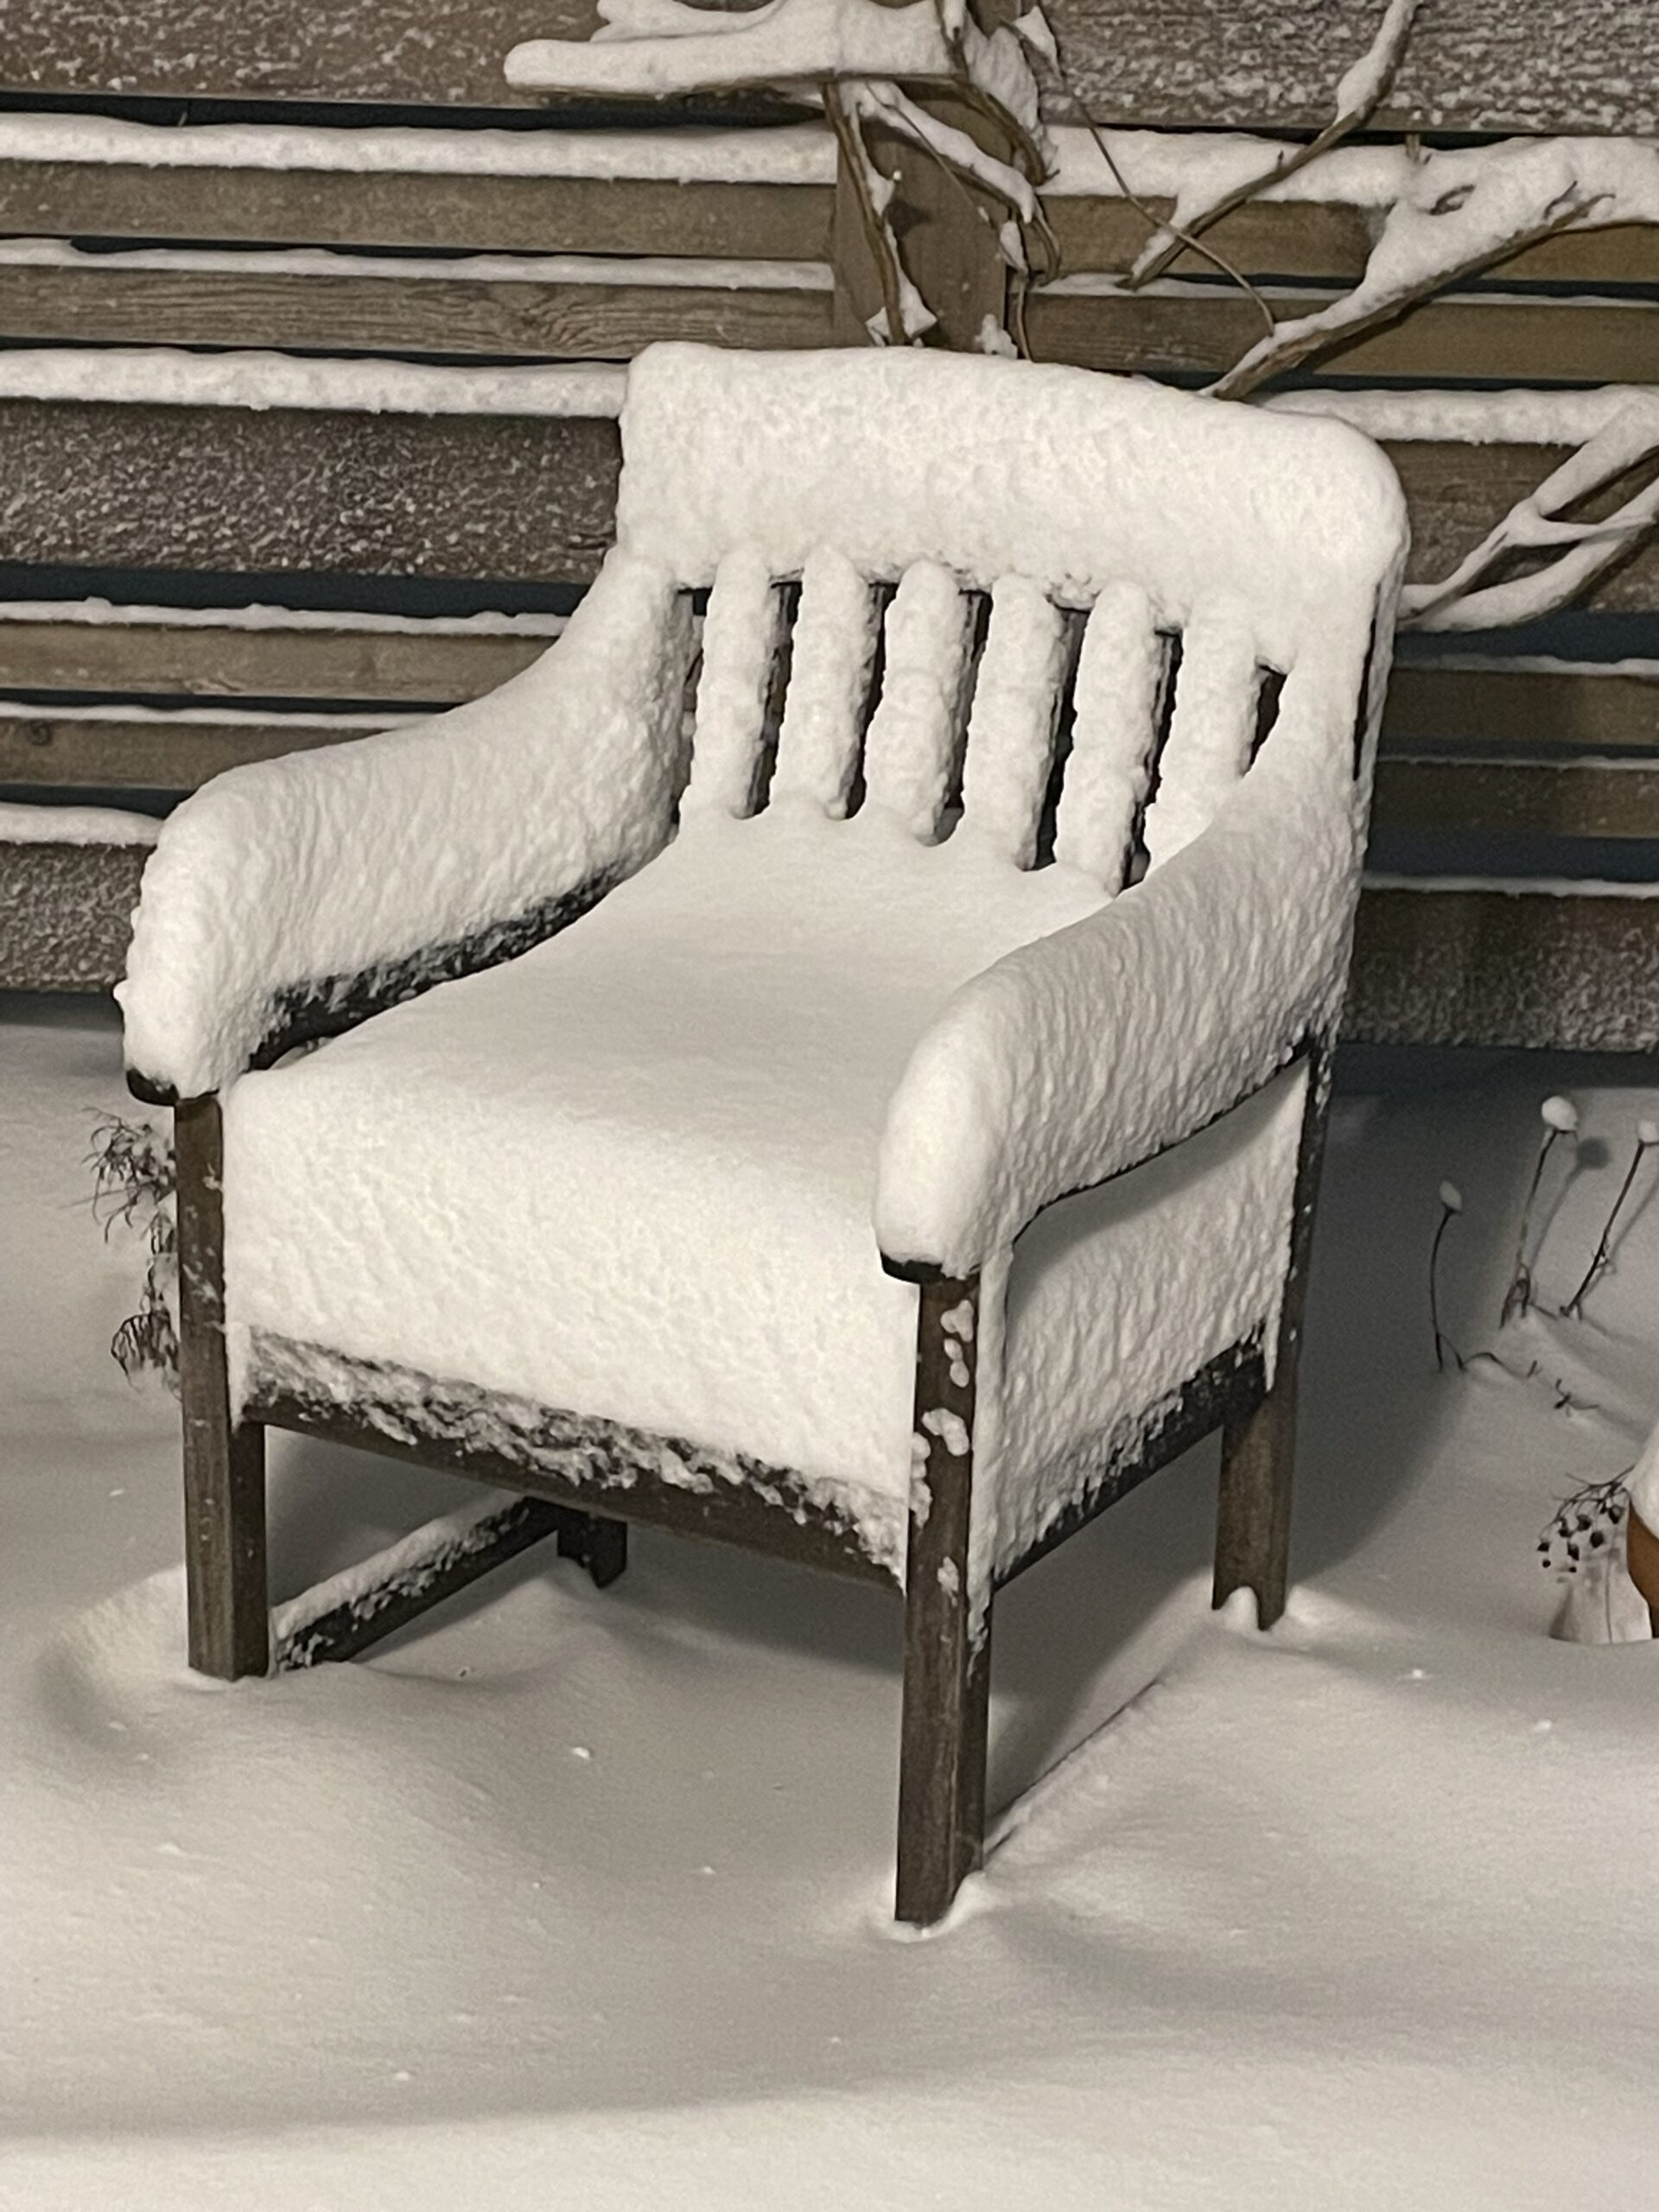 image of outside chair with about 10 inches of snow on it.